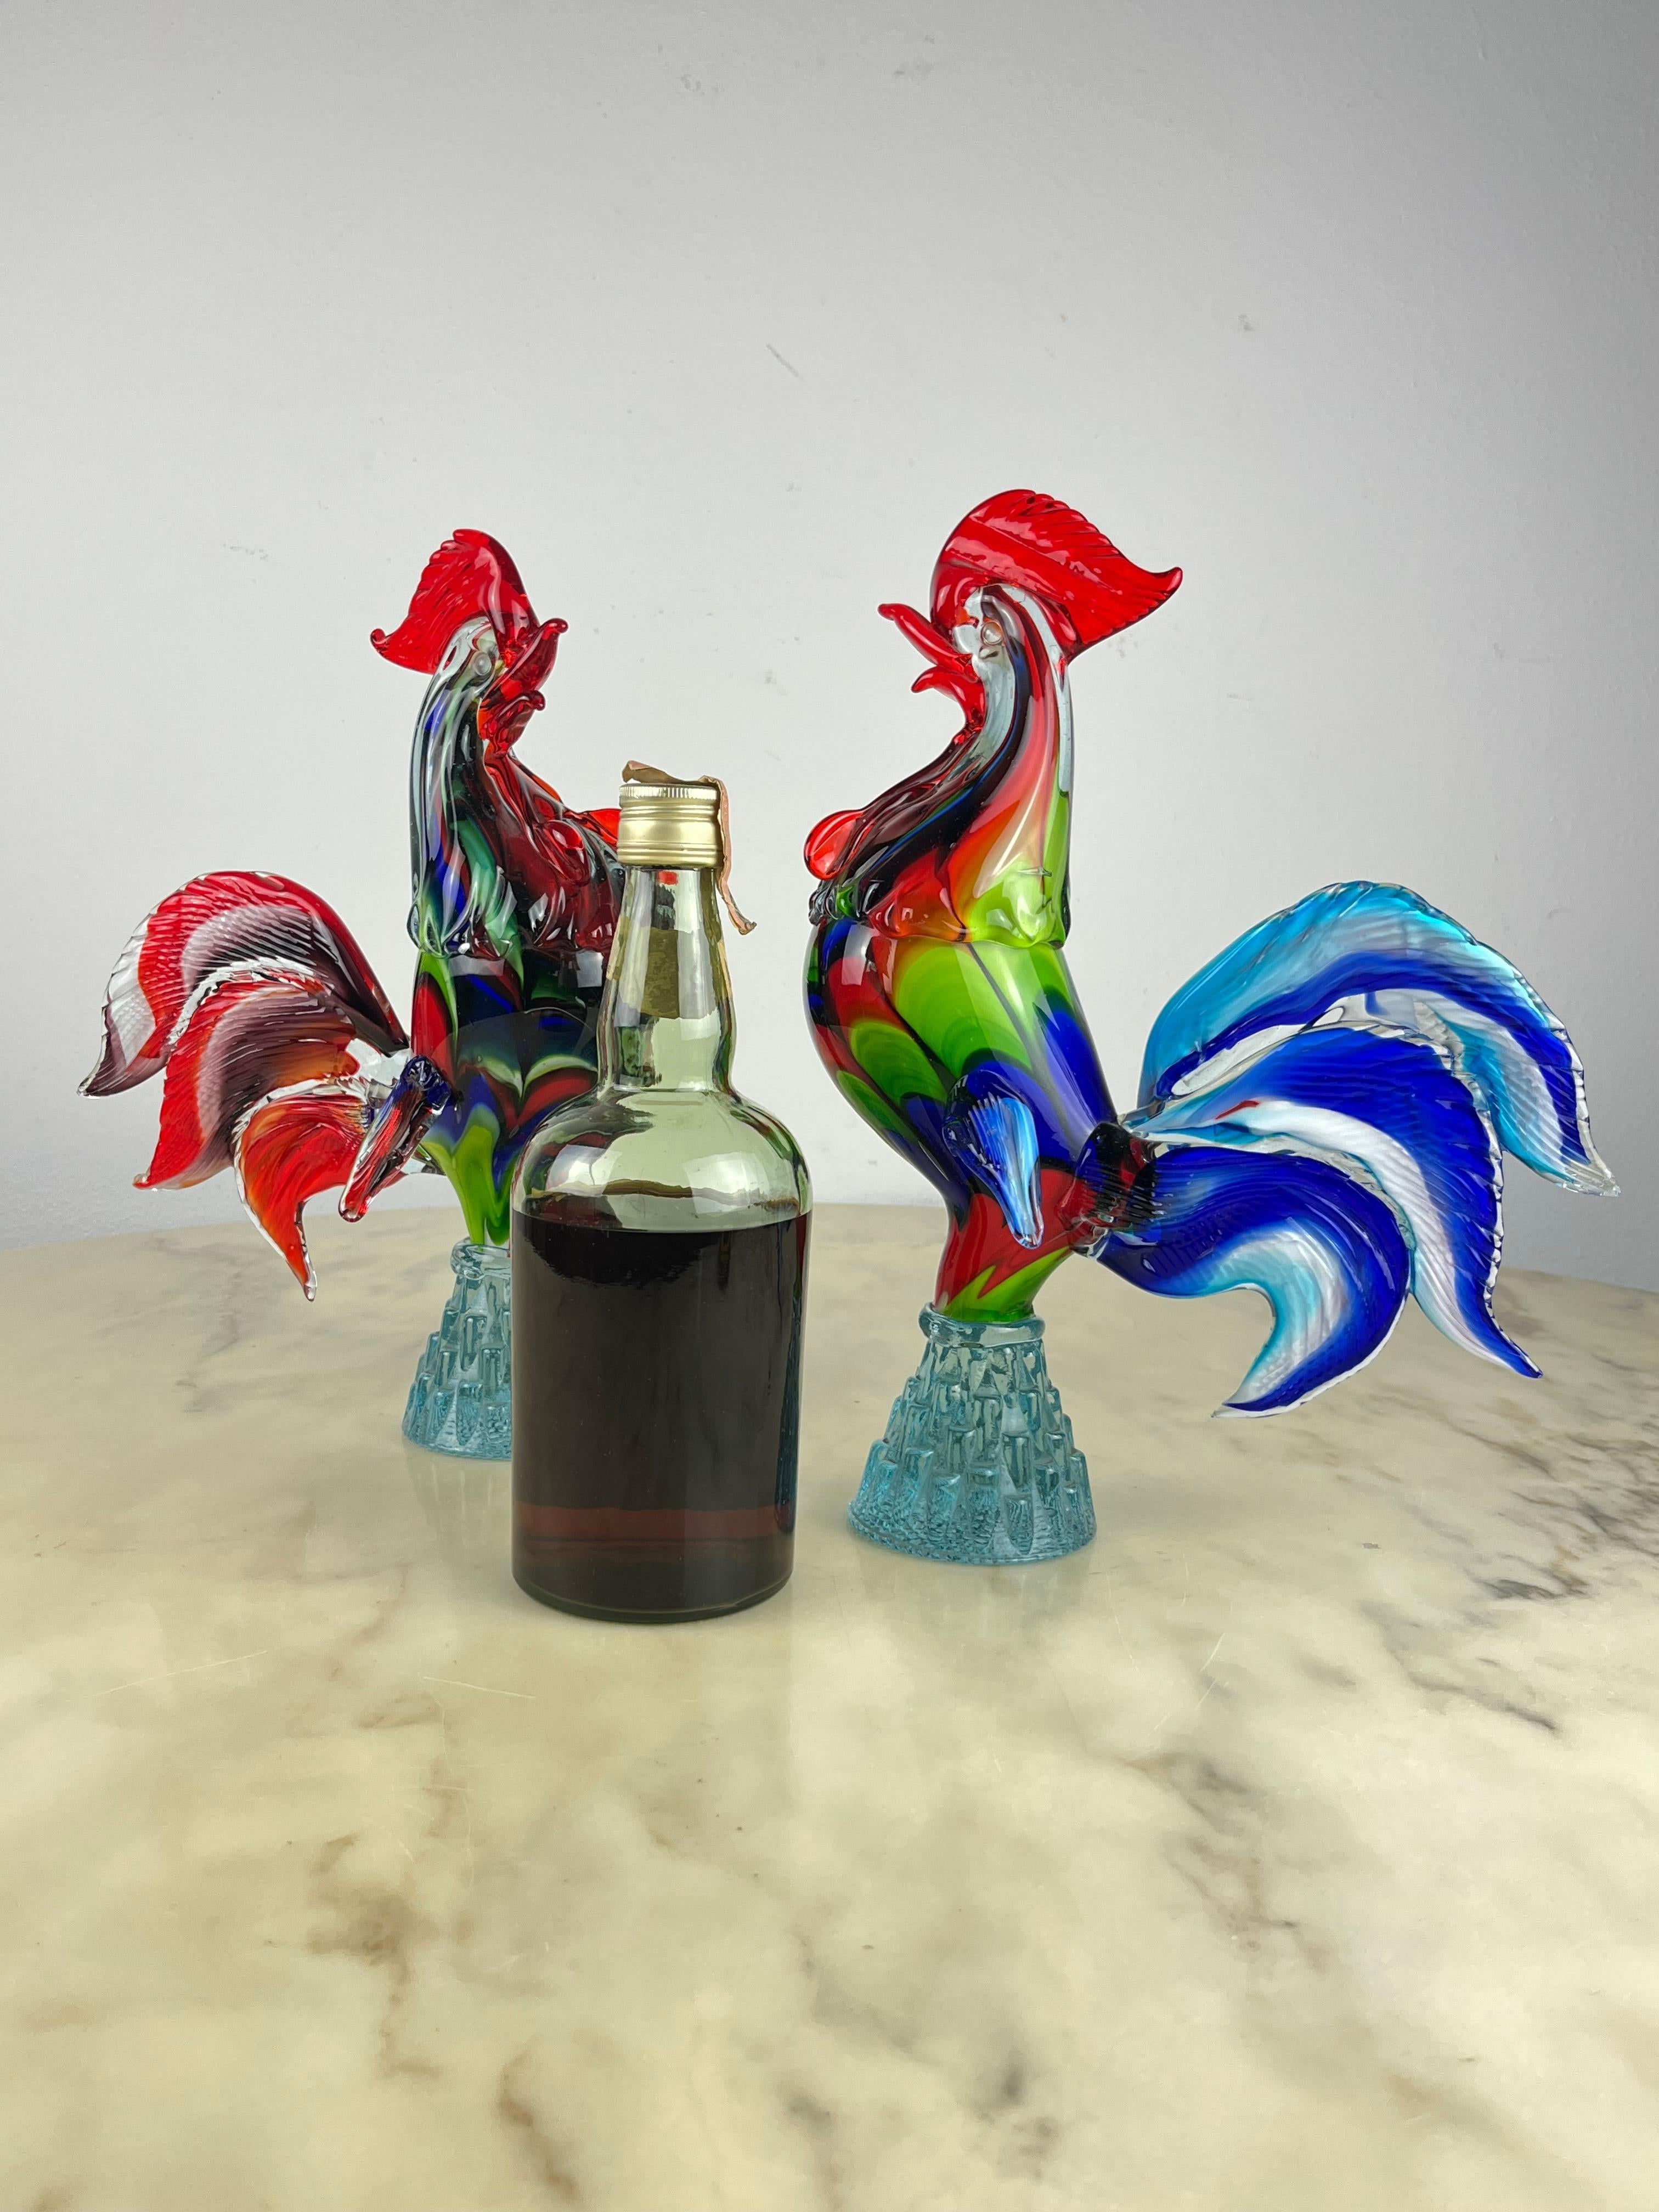 Pair of large roosters in Murano glass, Italy, 1970s
Purchased by my grandparents in one of the most important shops in Piazza San Marco, during their honeymoon in Venice.
Intact, imperceptible chipping. Good conditions.
If you carefully look at the